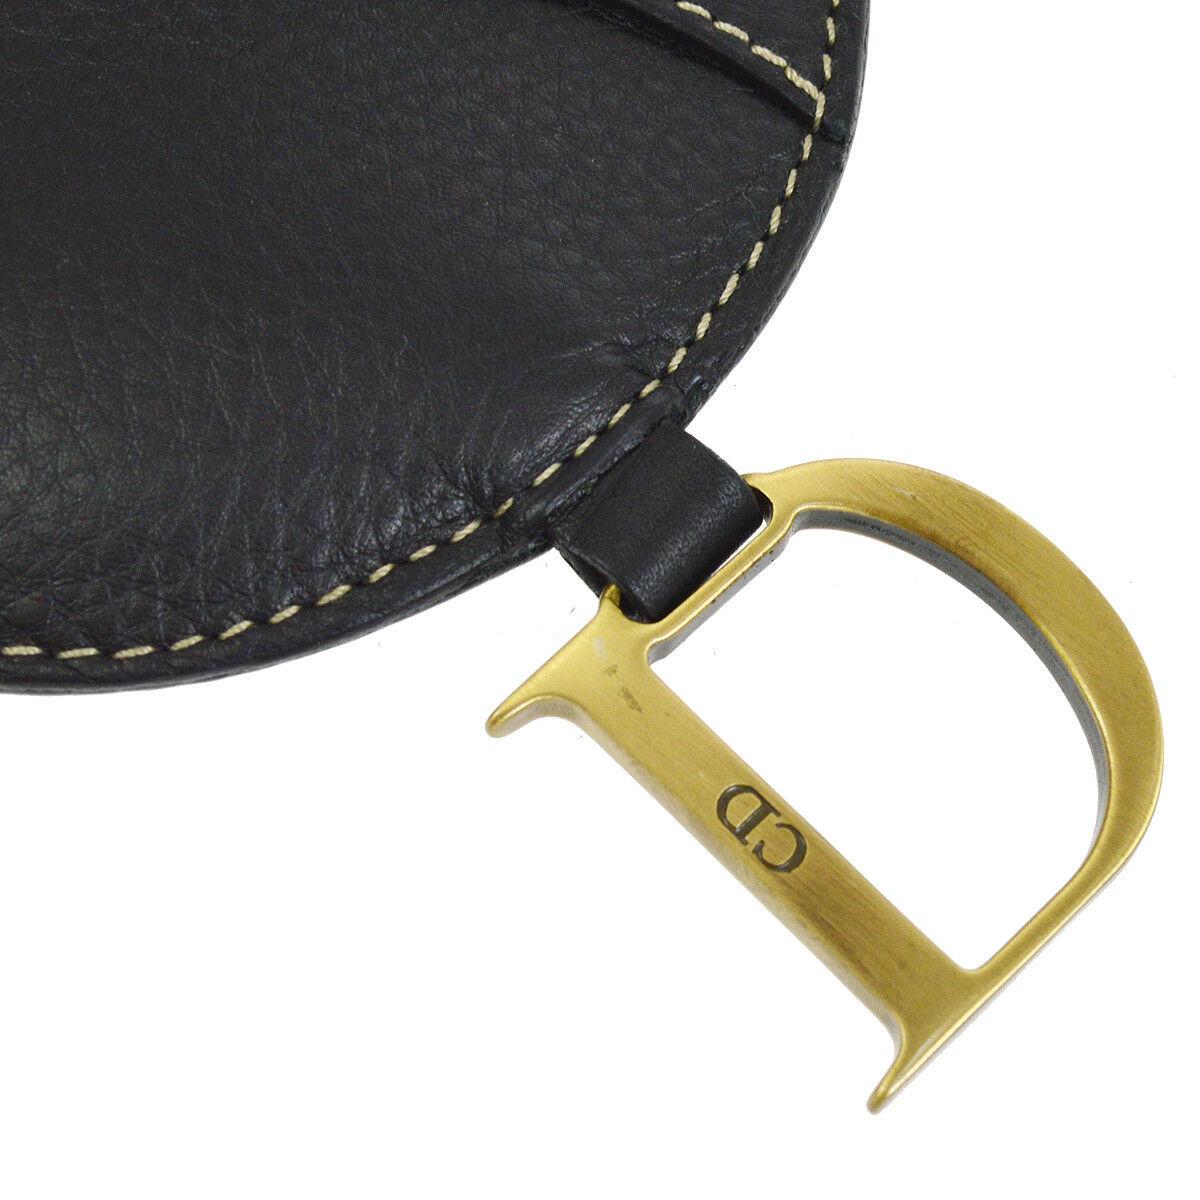 Dior Black Leather Gold 'D' Charm Stitch Fanny Pack Waist Bum Belt Bag

Canvas
Leather
Gold tone hardware
Woven lining
Made in Italy
Belt measurements 33-35.5